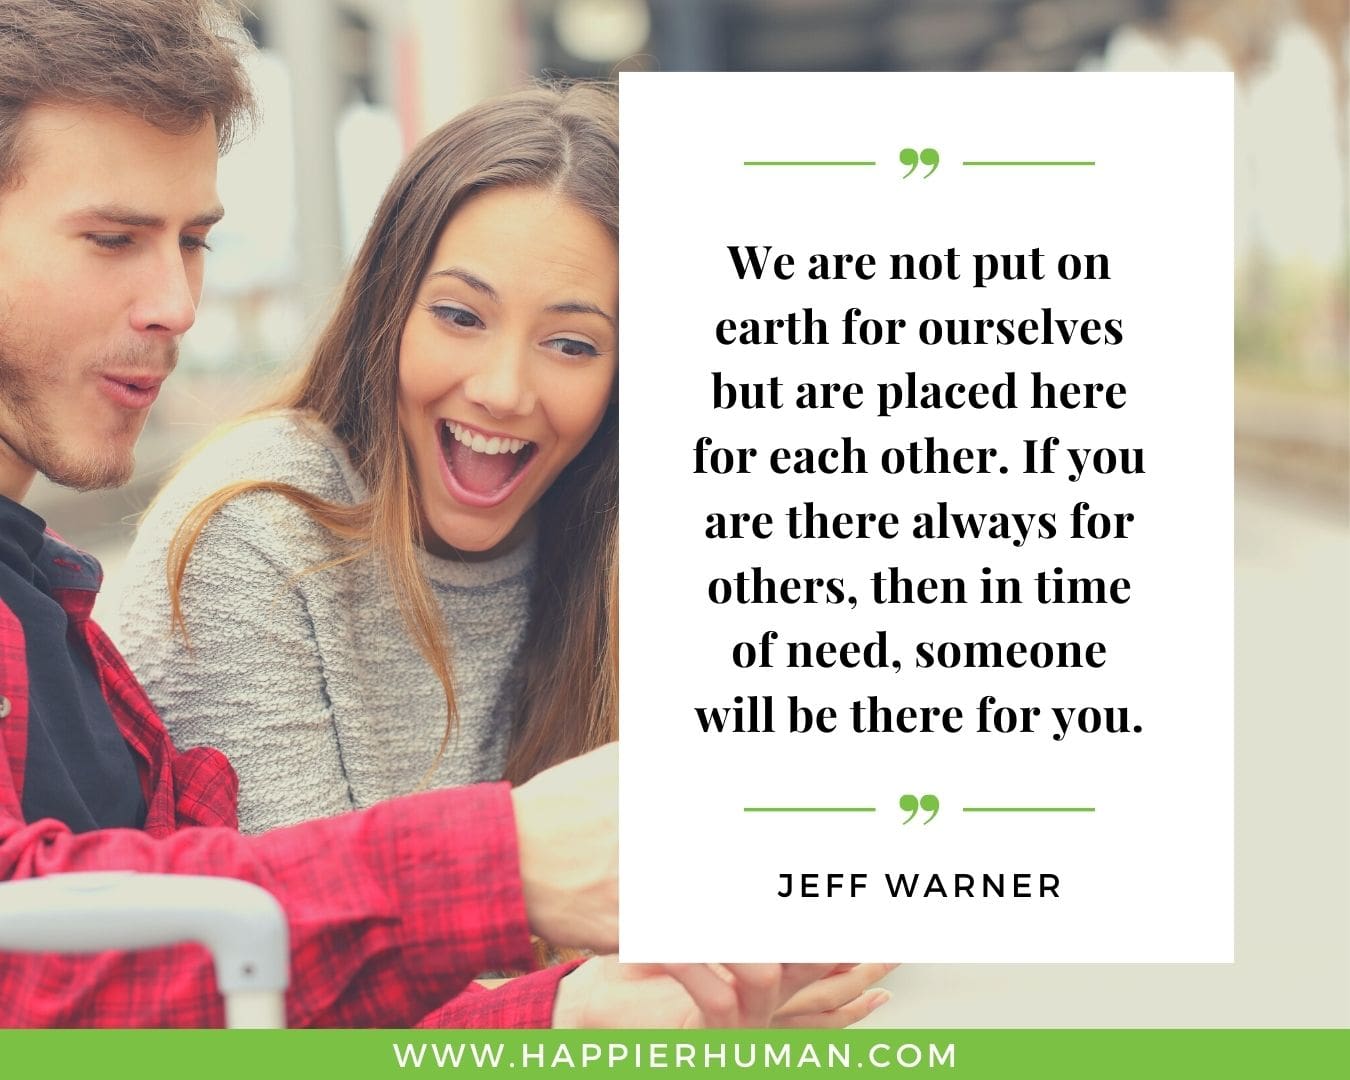 I’m Here for You Quotes - “We are not put on earth for ourselves but are placed here for each other. If you are there always for others, then in time of need, someone will be there for you.” – Jeff Warner